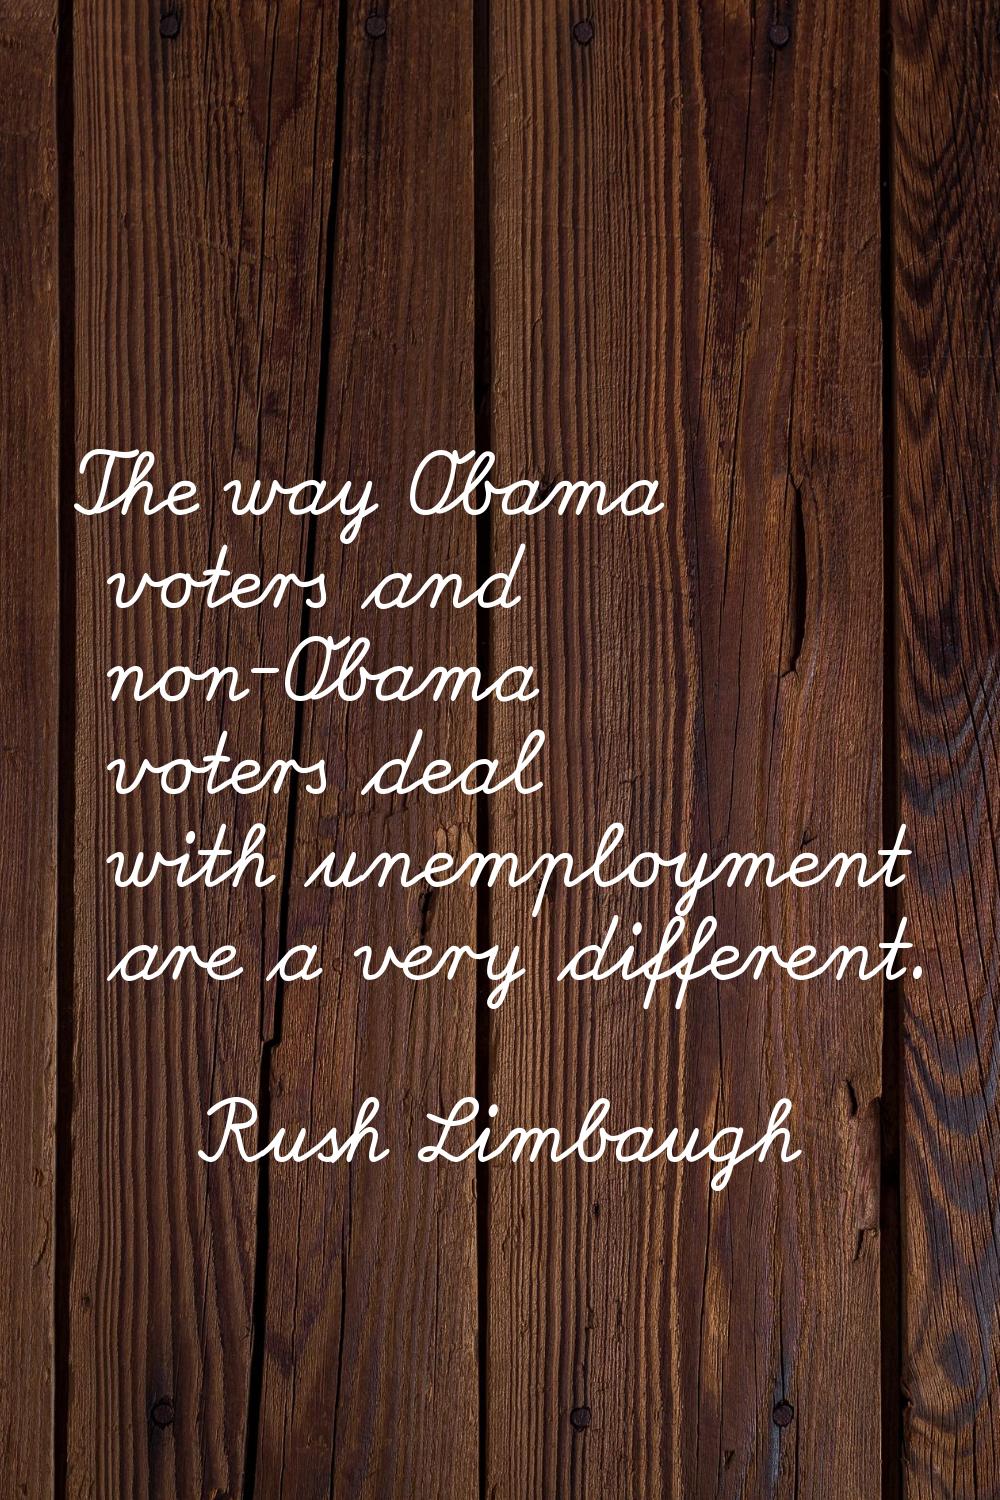 The way Obama voters and non-Obama voters deal with unemployment are a very different.